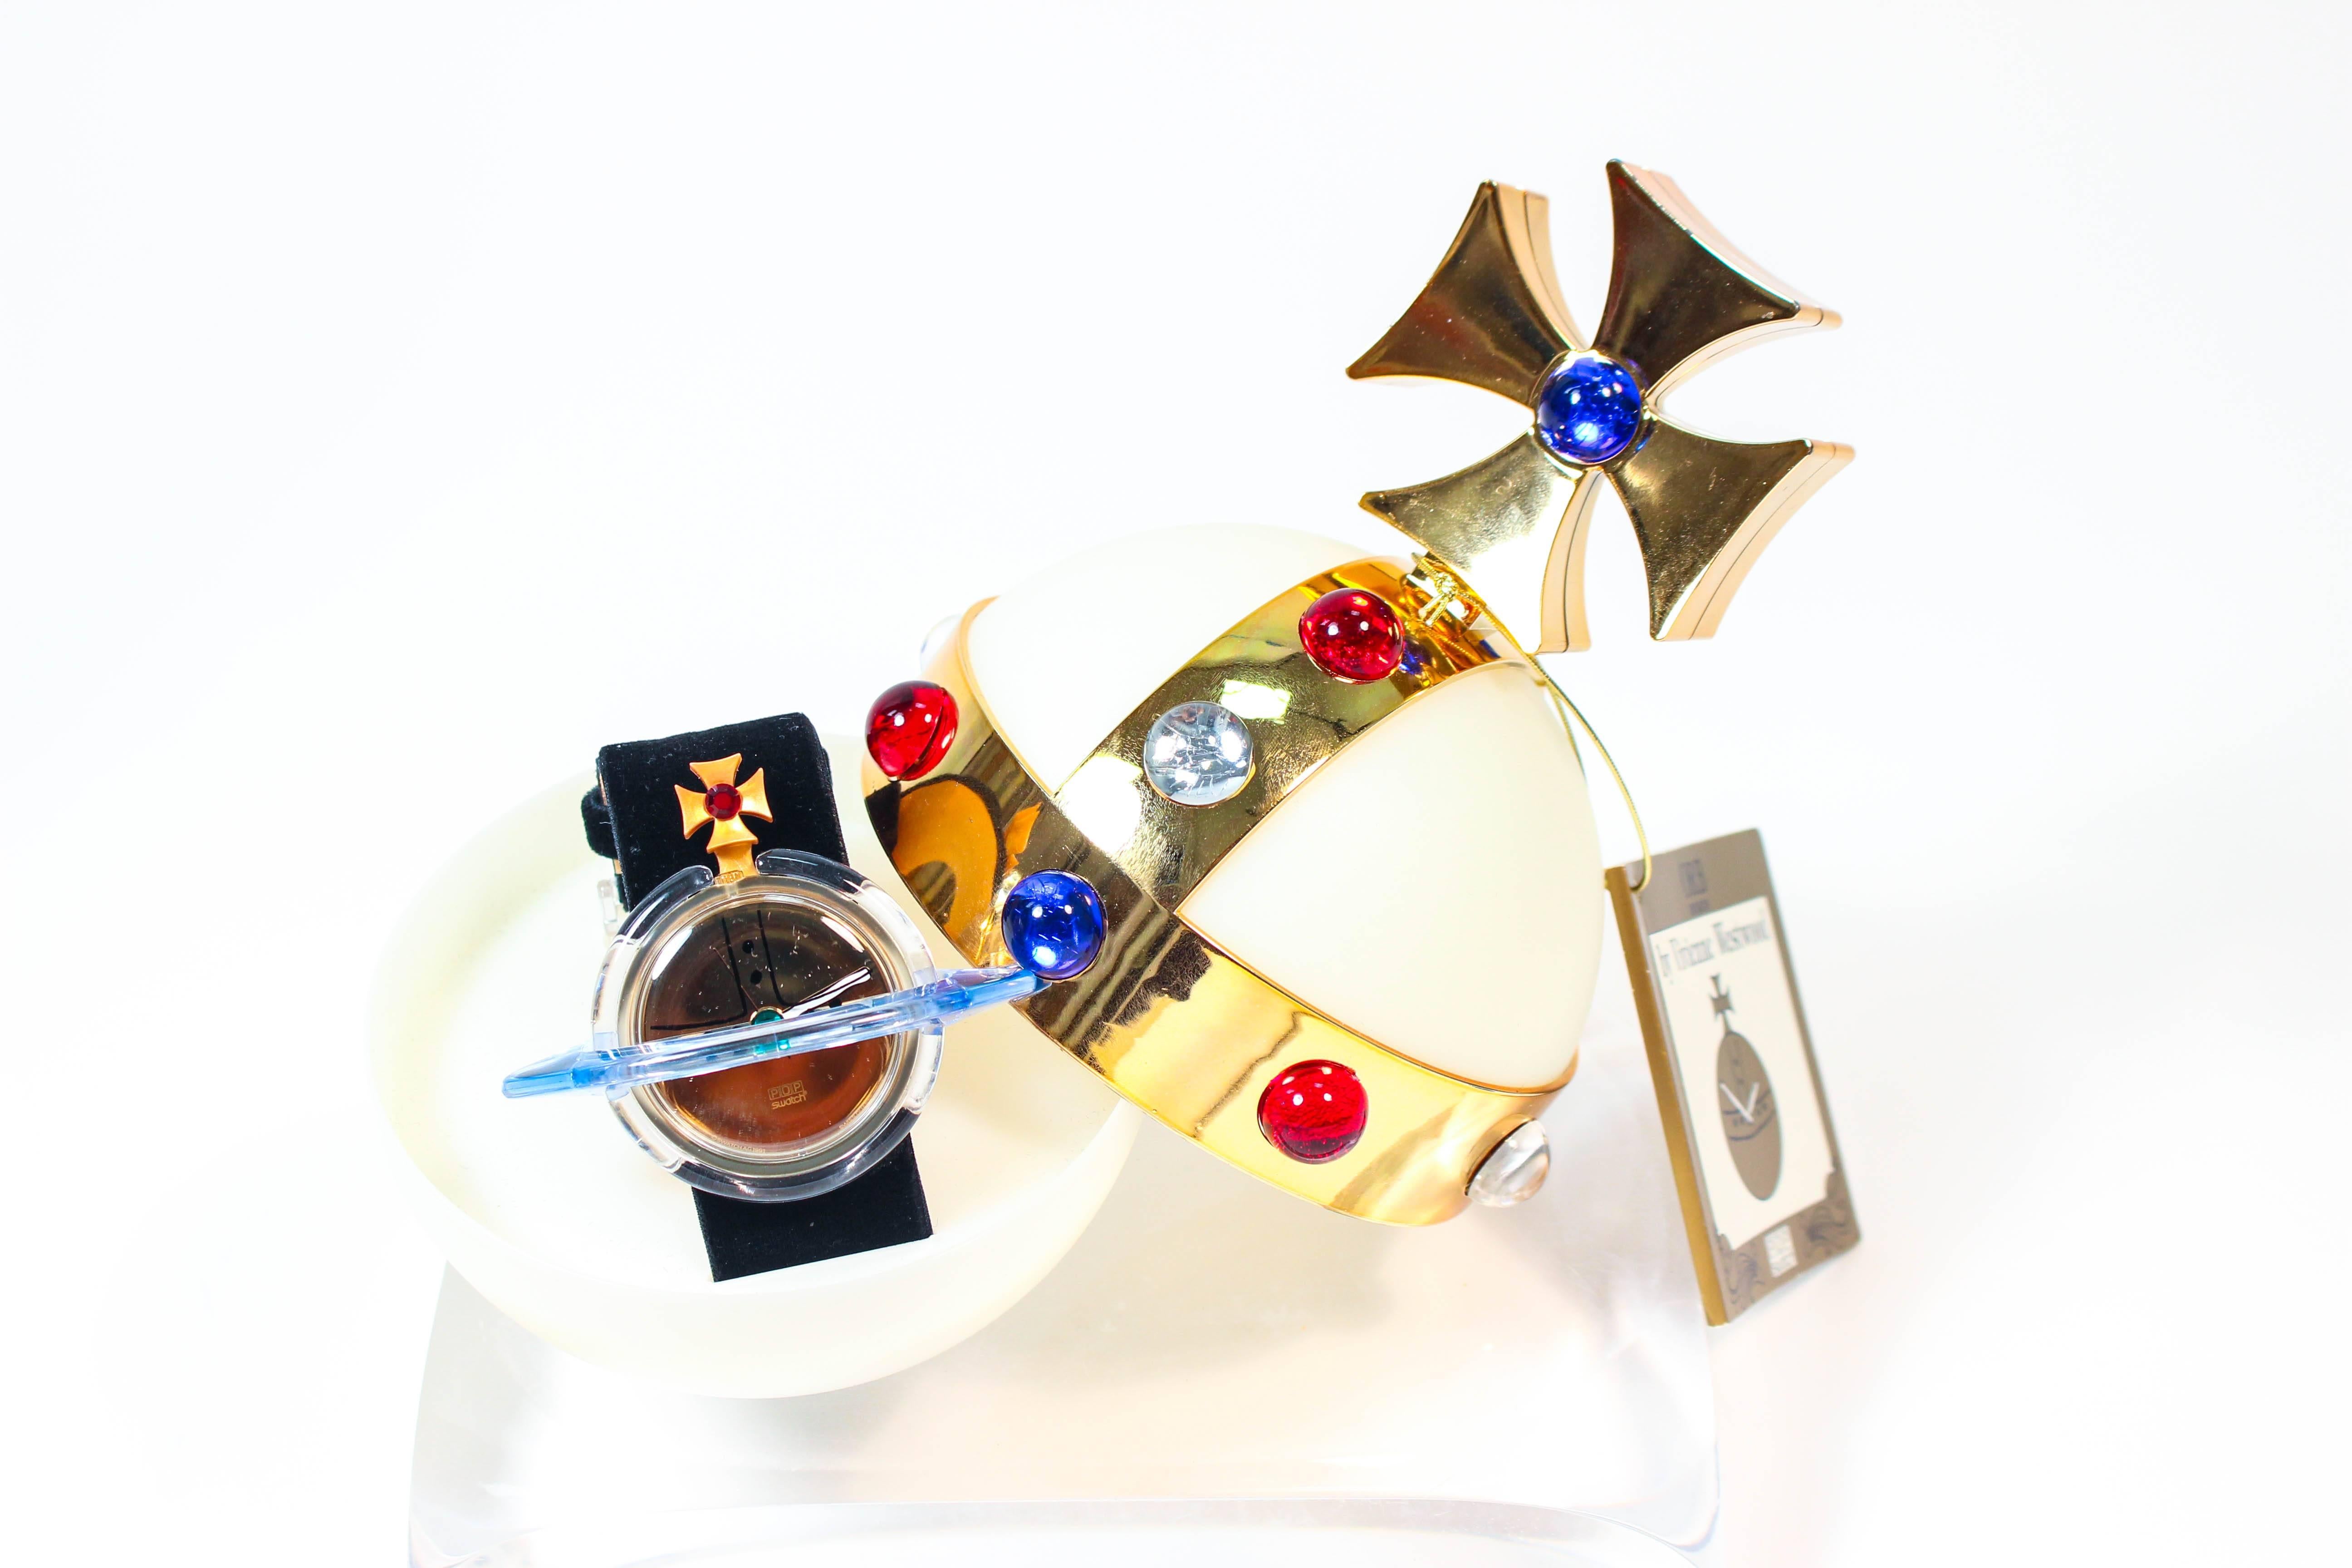 This vintage Vivienne Westwood watch is by Swatch. Features an Orb holder with original box and paperwork. The watch has a plastic composition with black velvet band. In excellent unused vintage condition.

**Please cross-reference measurements for